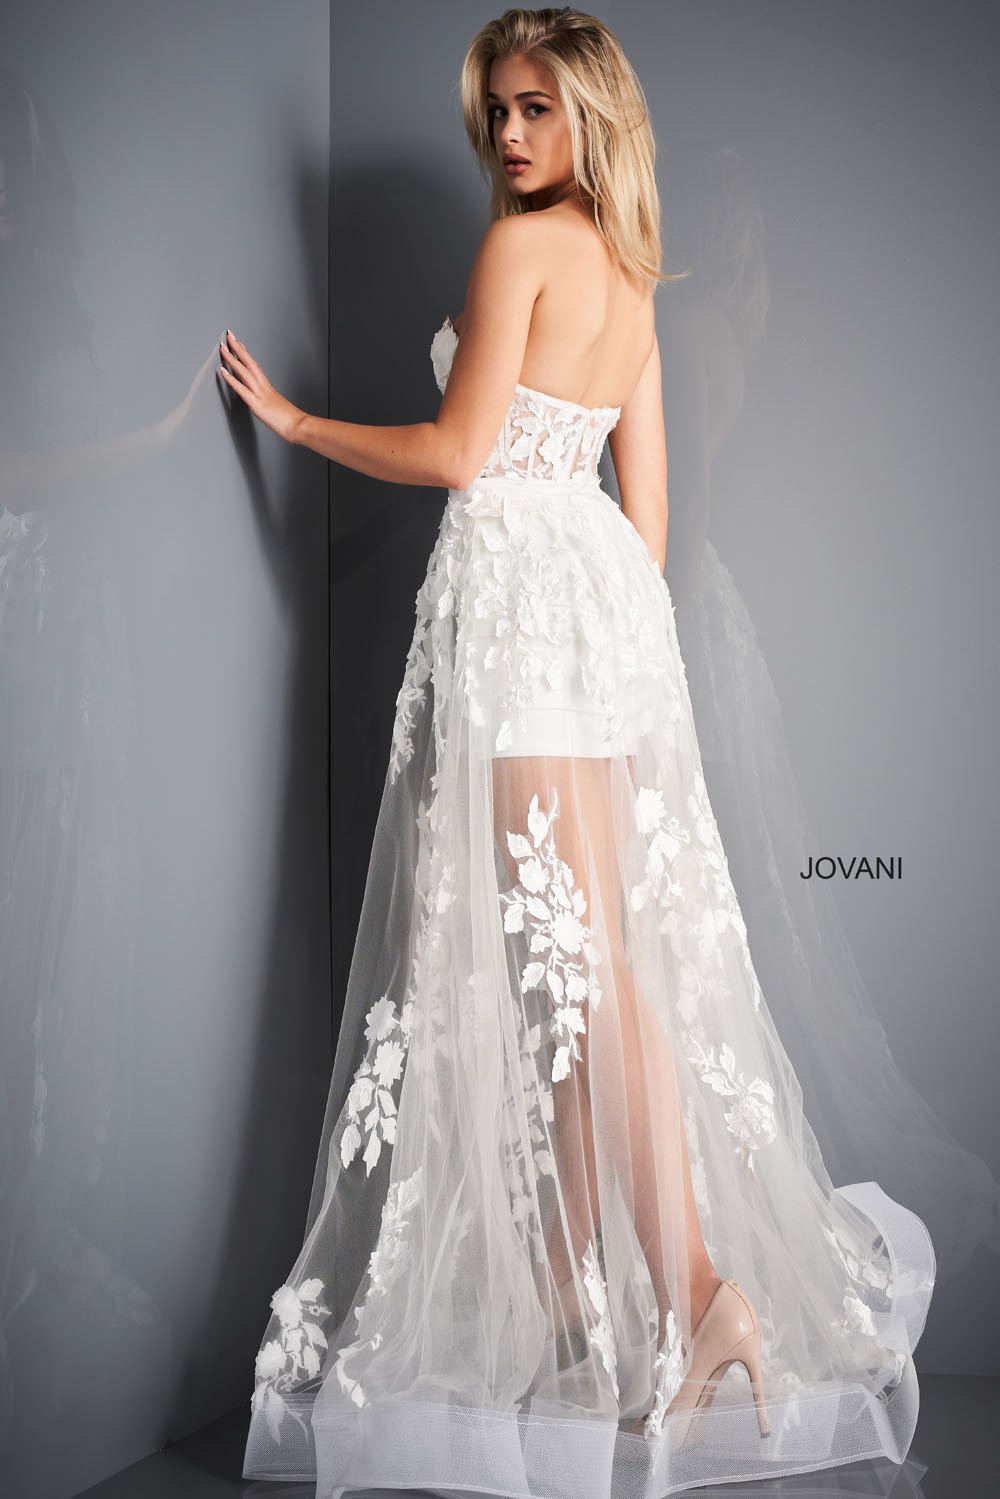 Jovani 02845 dress images in these colors: Black, Dark Blush, Ivory.